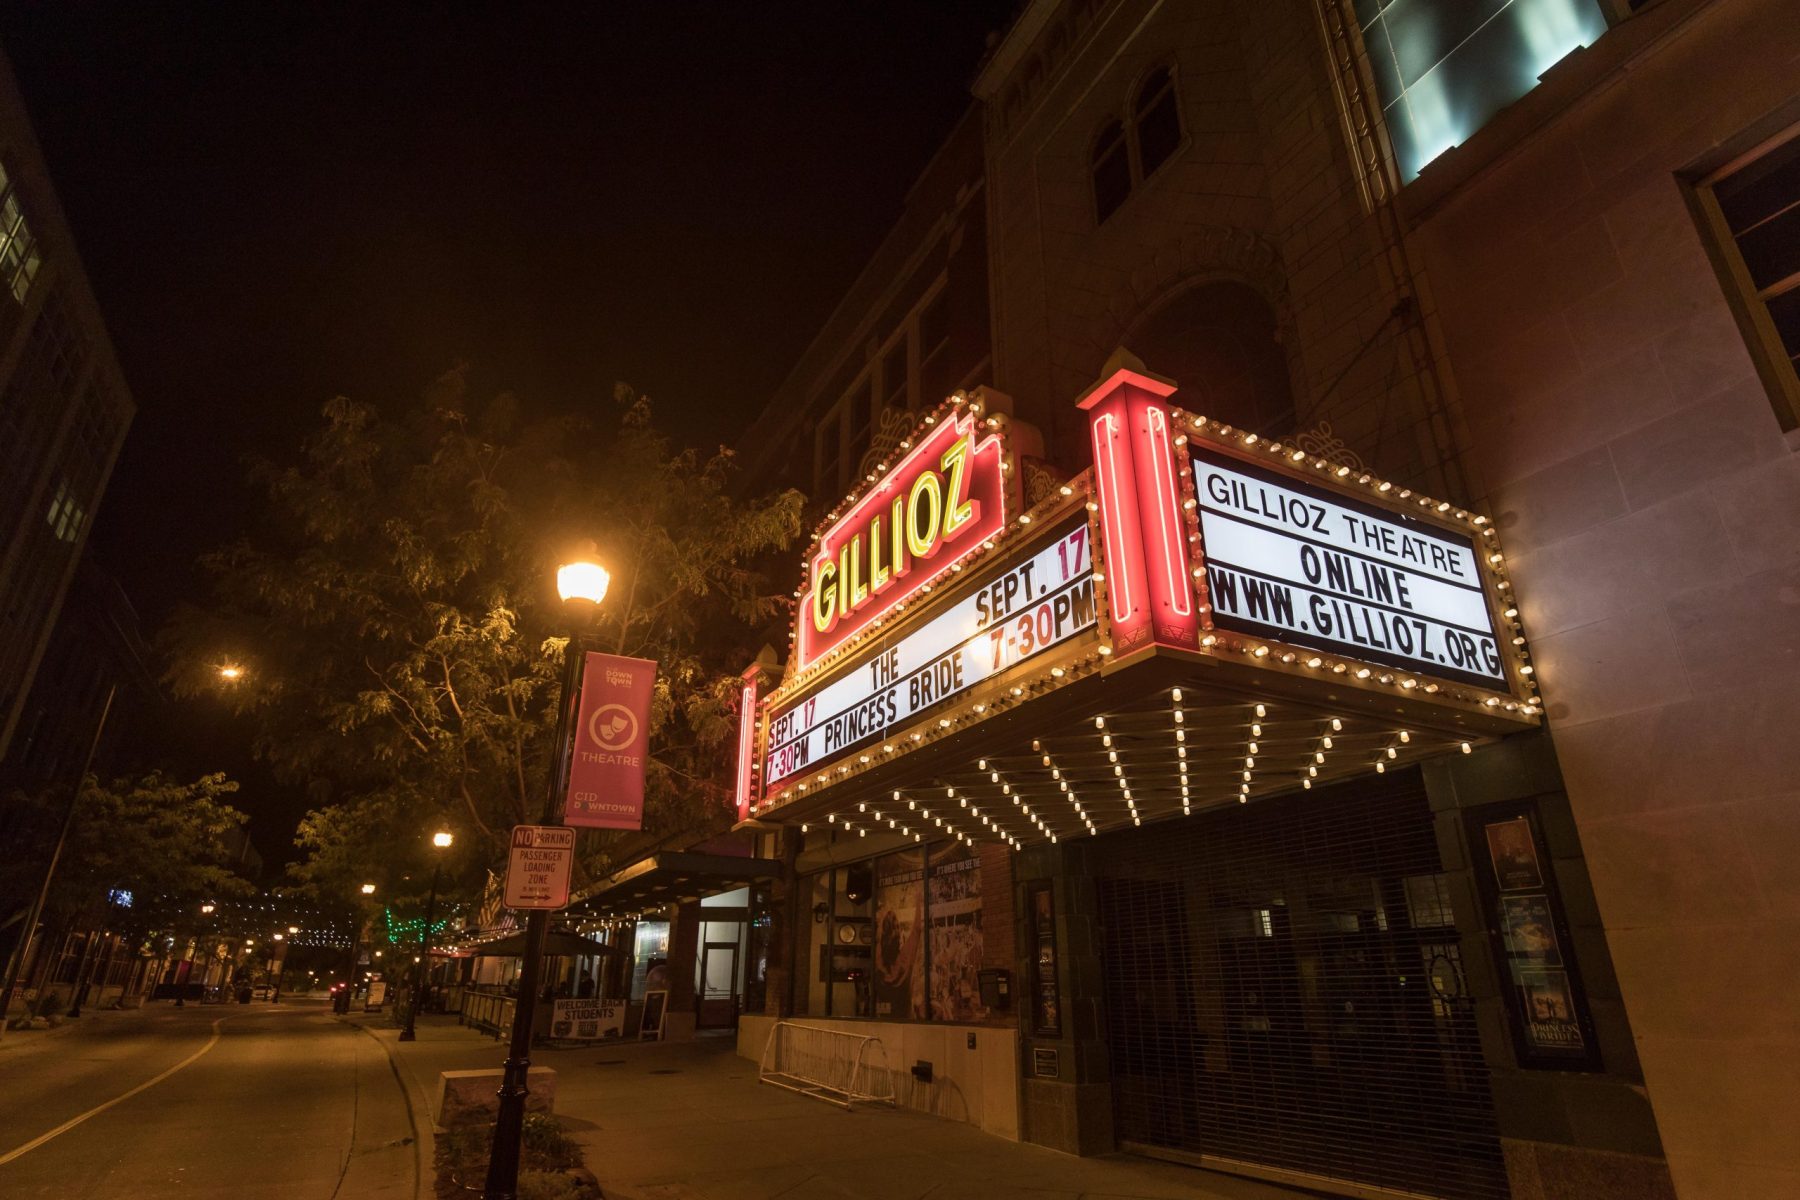 The Historic Gillioz theater lit up at night. The sign indicates that they are showing the princess bride.